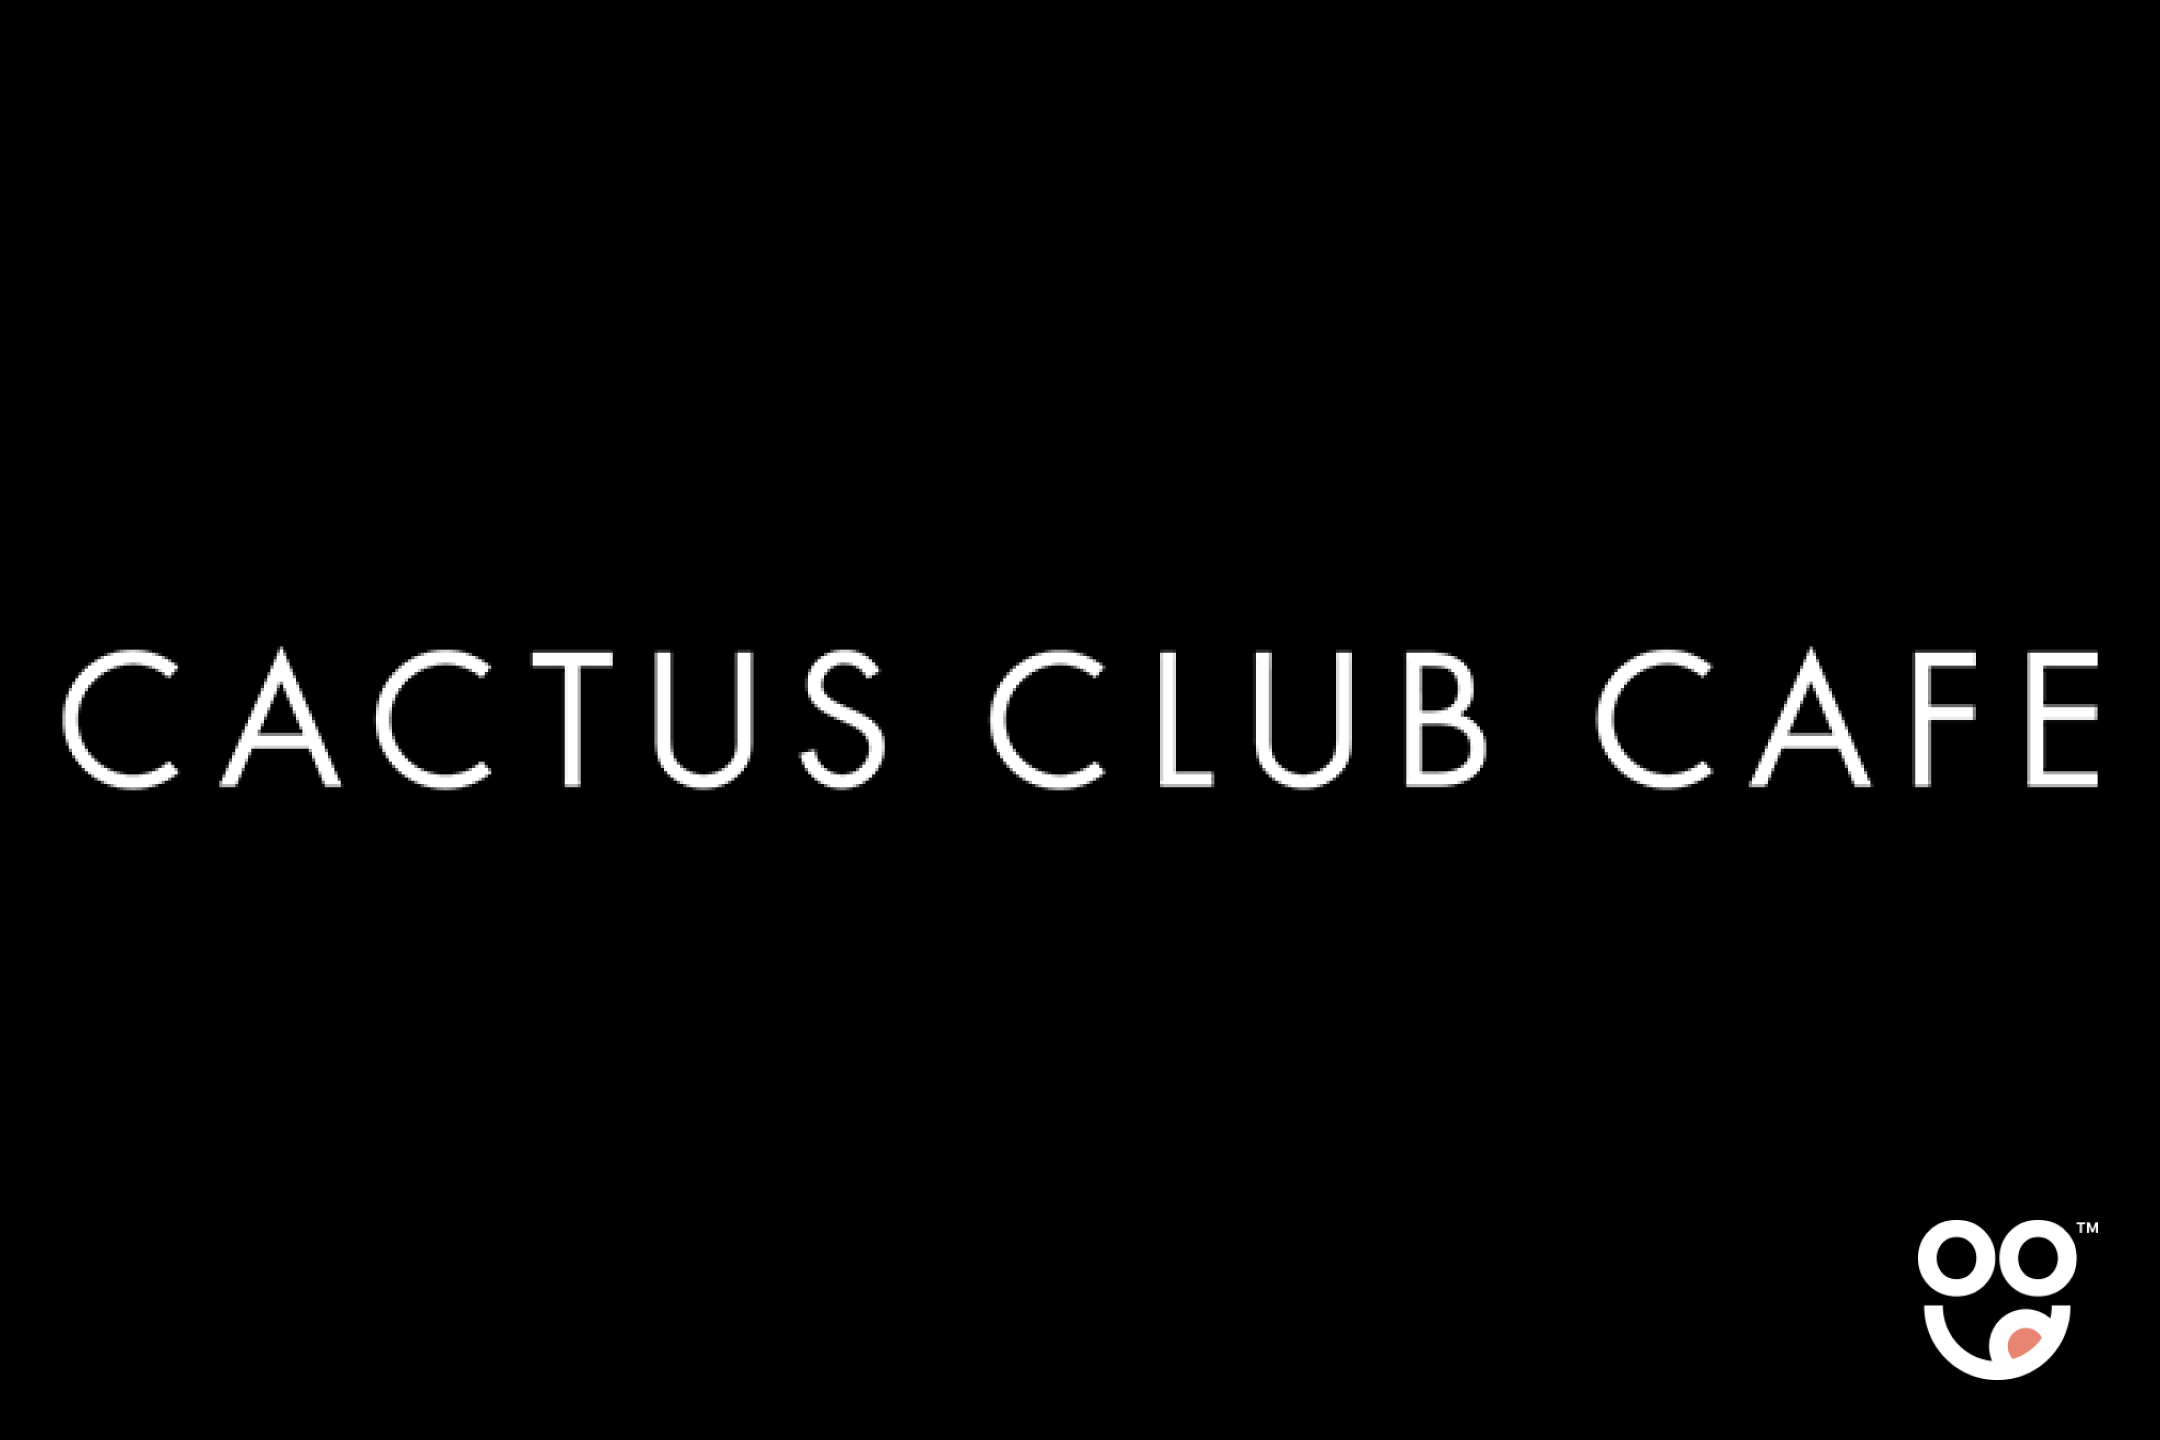 Cactus Club Cafe to Utilize The Good Flour Corp. Products – Investors